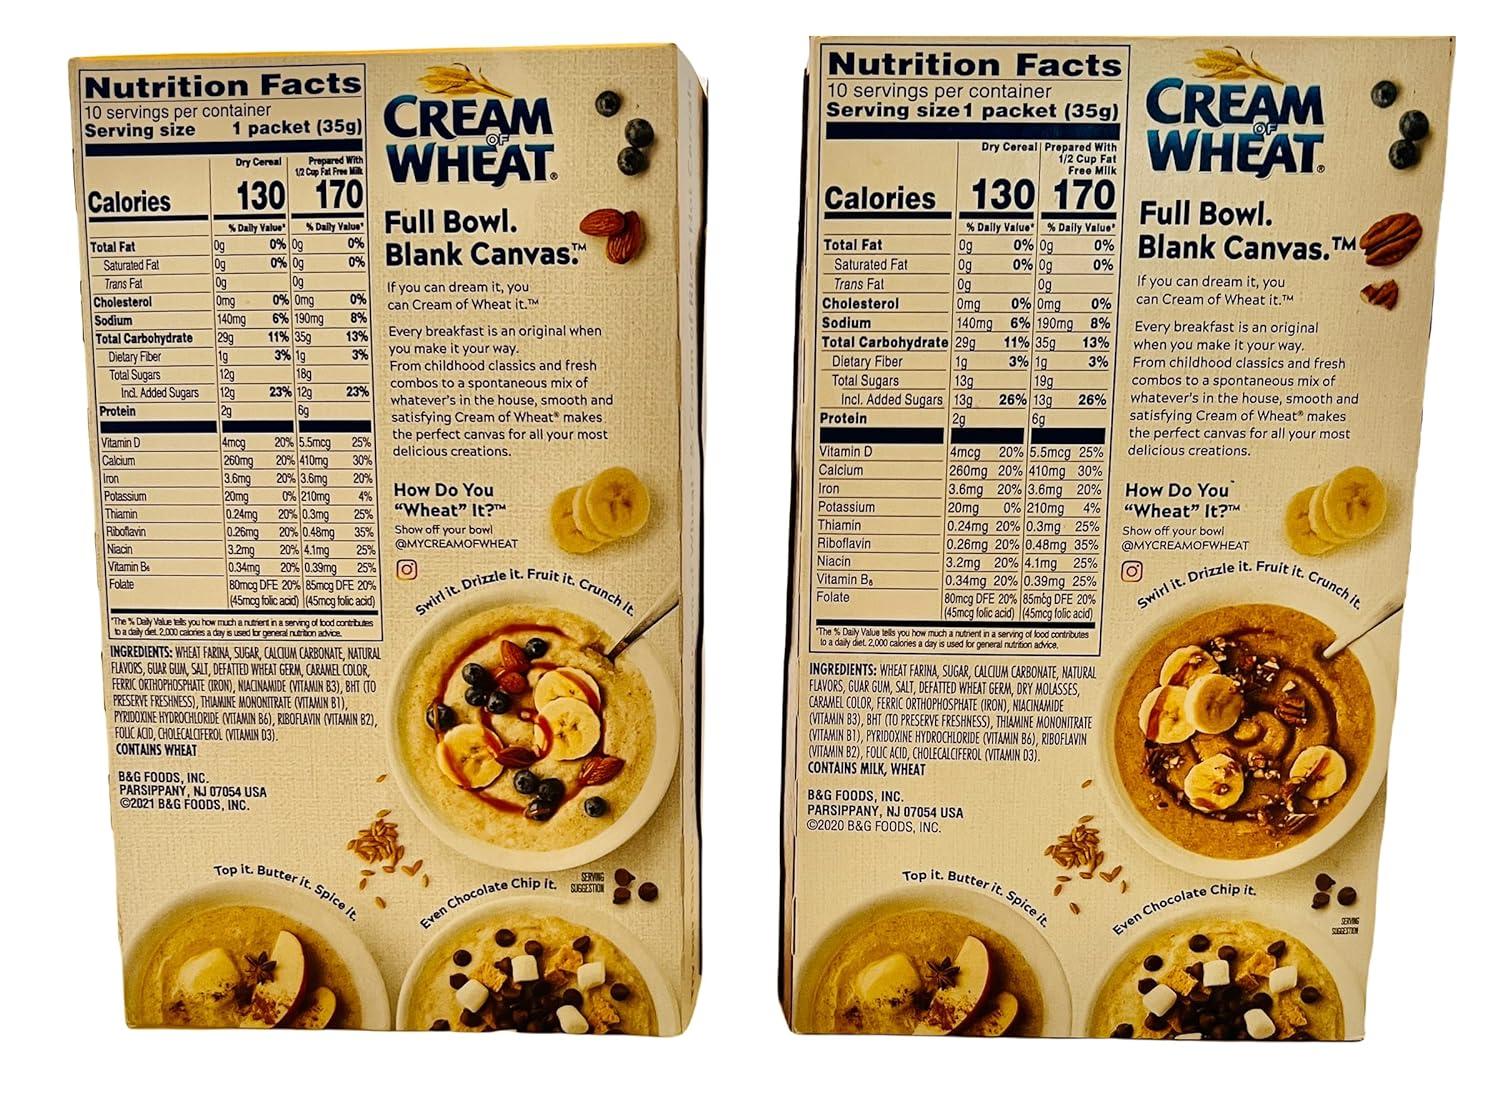 Cream of Wheat Instant Hot Cereal, Maple Brown Sugar, 12.3 Ounce